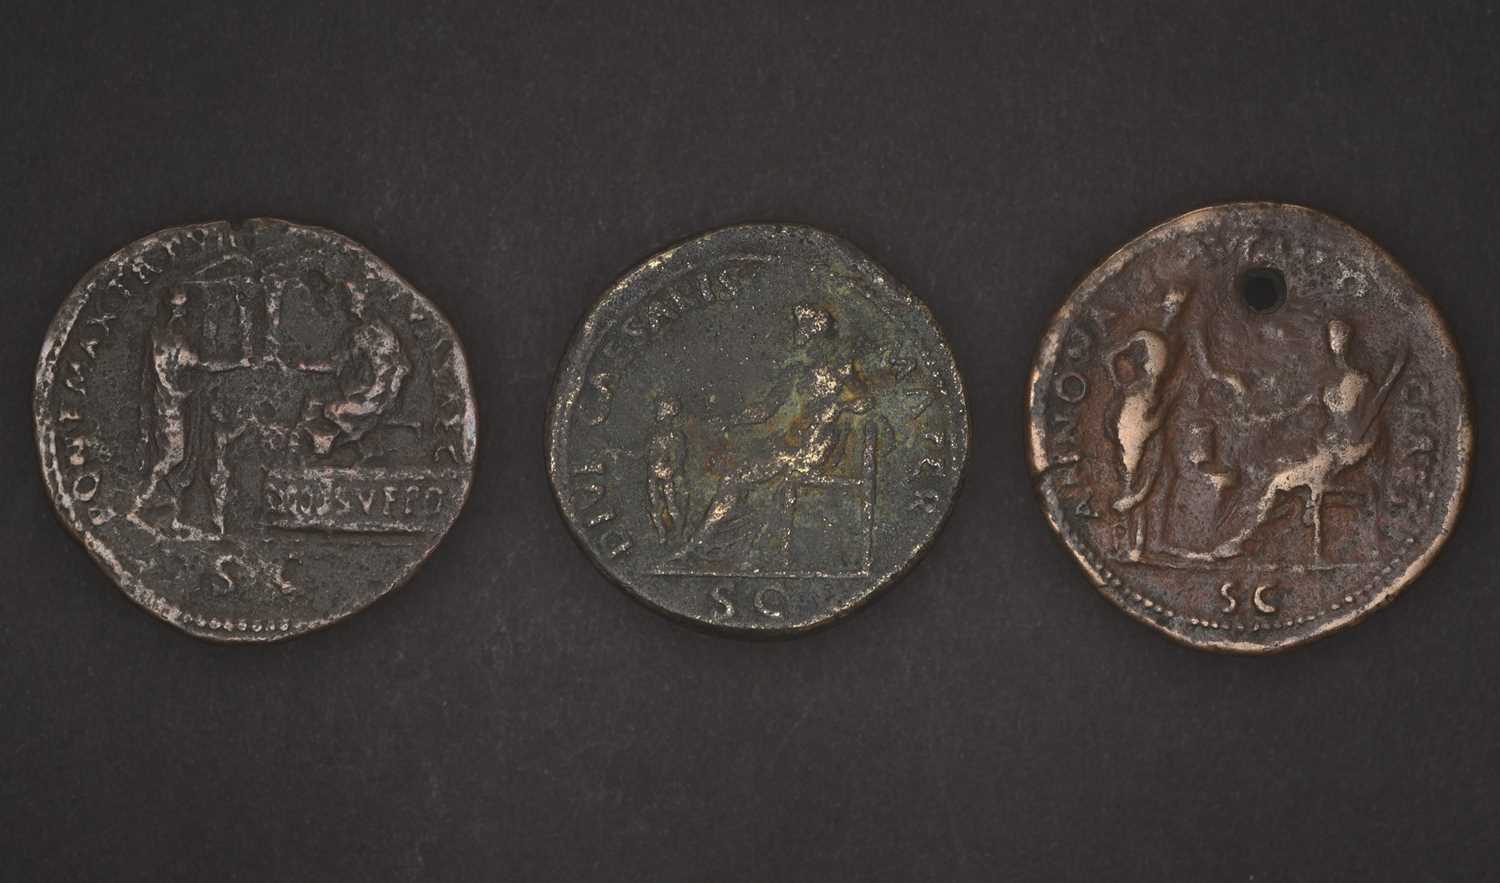 3 x 'Paduan' Medals comprising: (1) Imitation of Domitian (AD 81-96) Sestertius after Giovanni da - Image 2 of 6